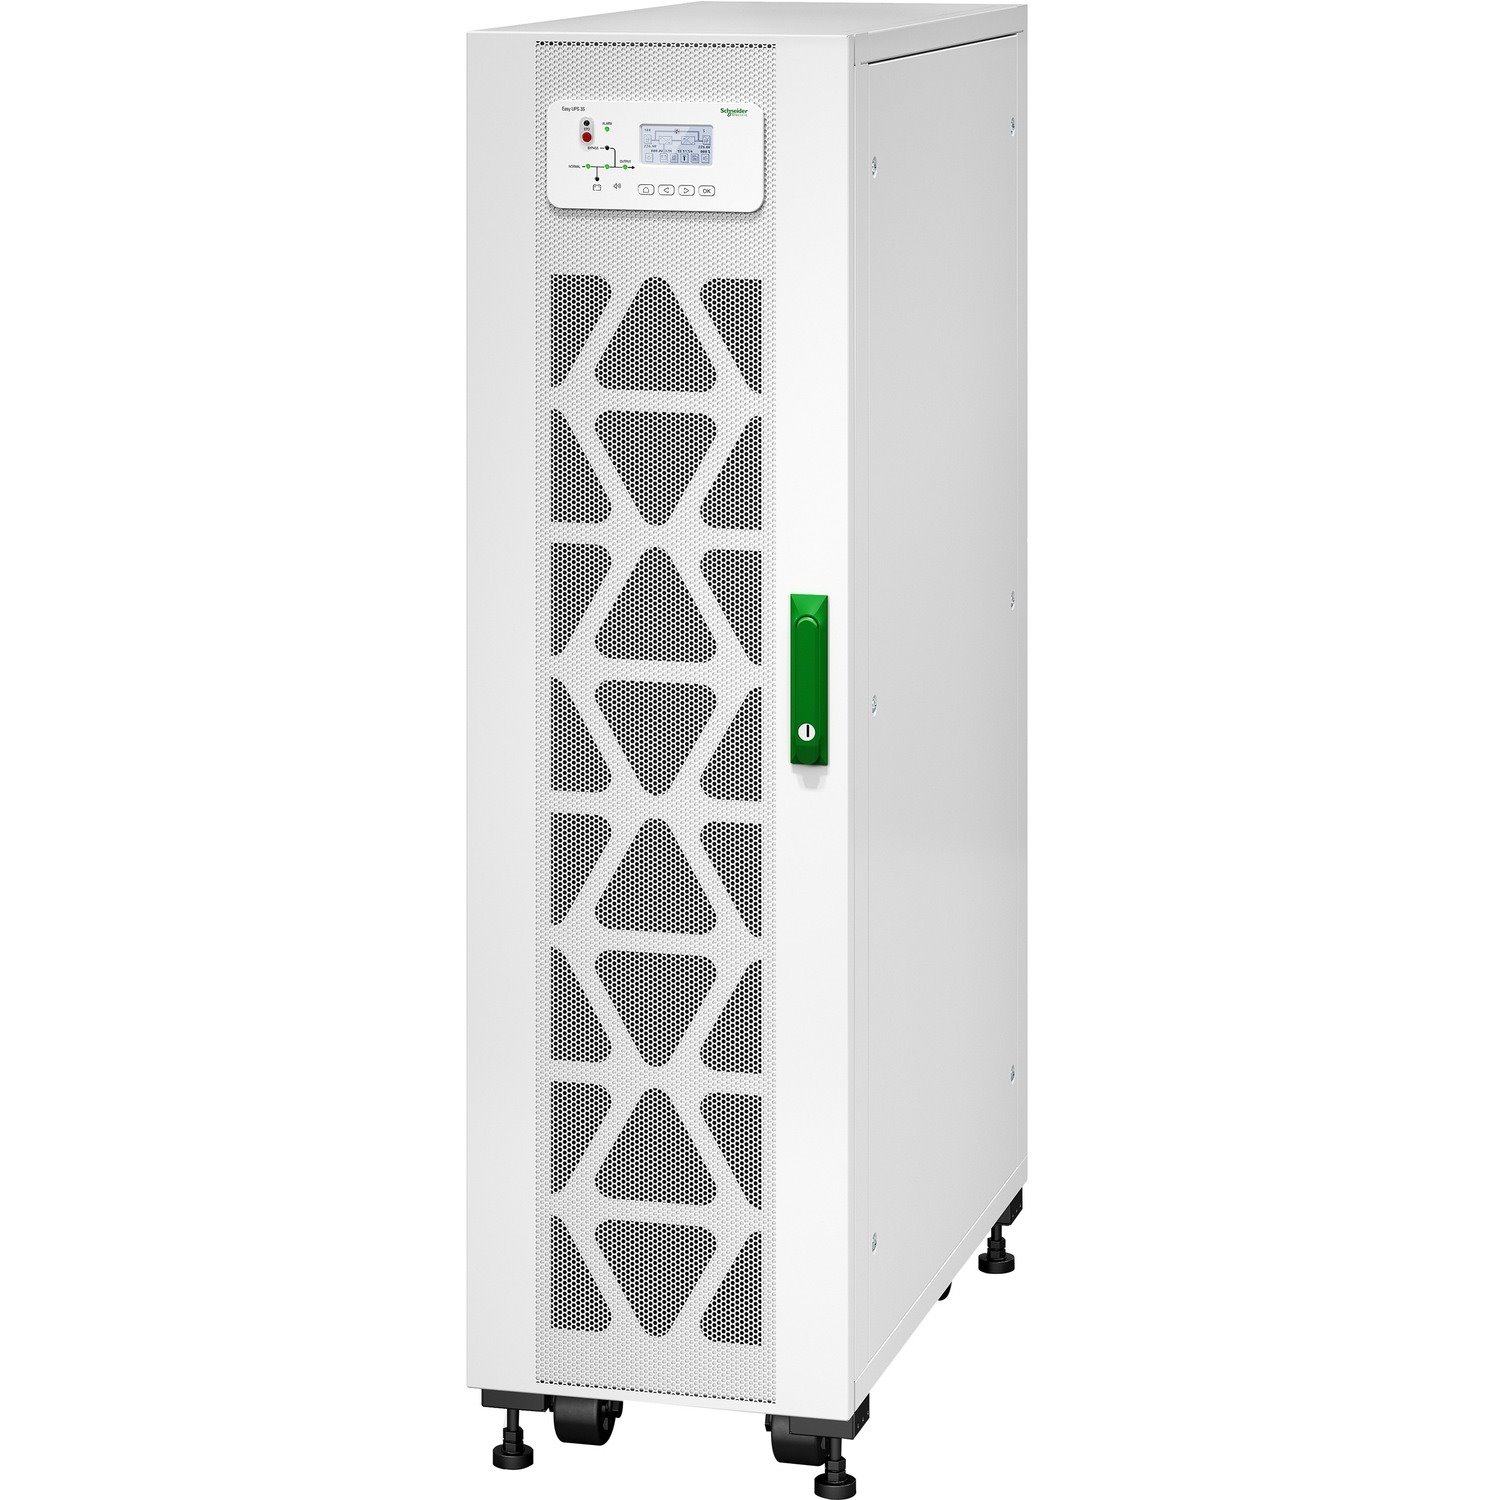 Schneider Electric Easy UPS 3S Double Conversion Online UPS - 15 kVA/15 kW